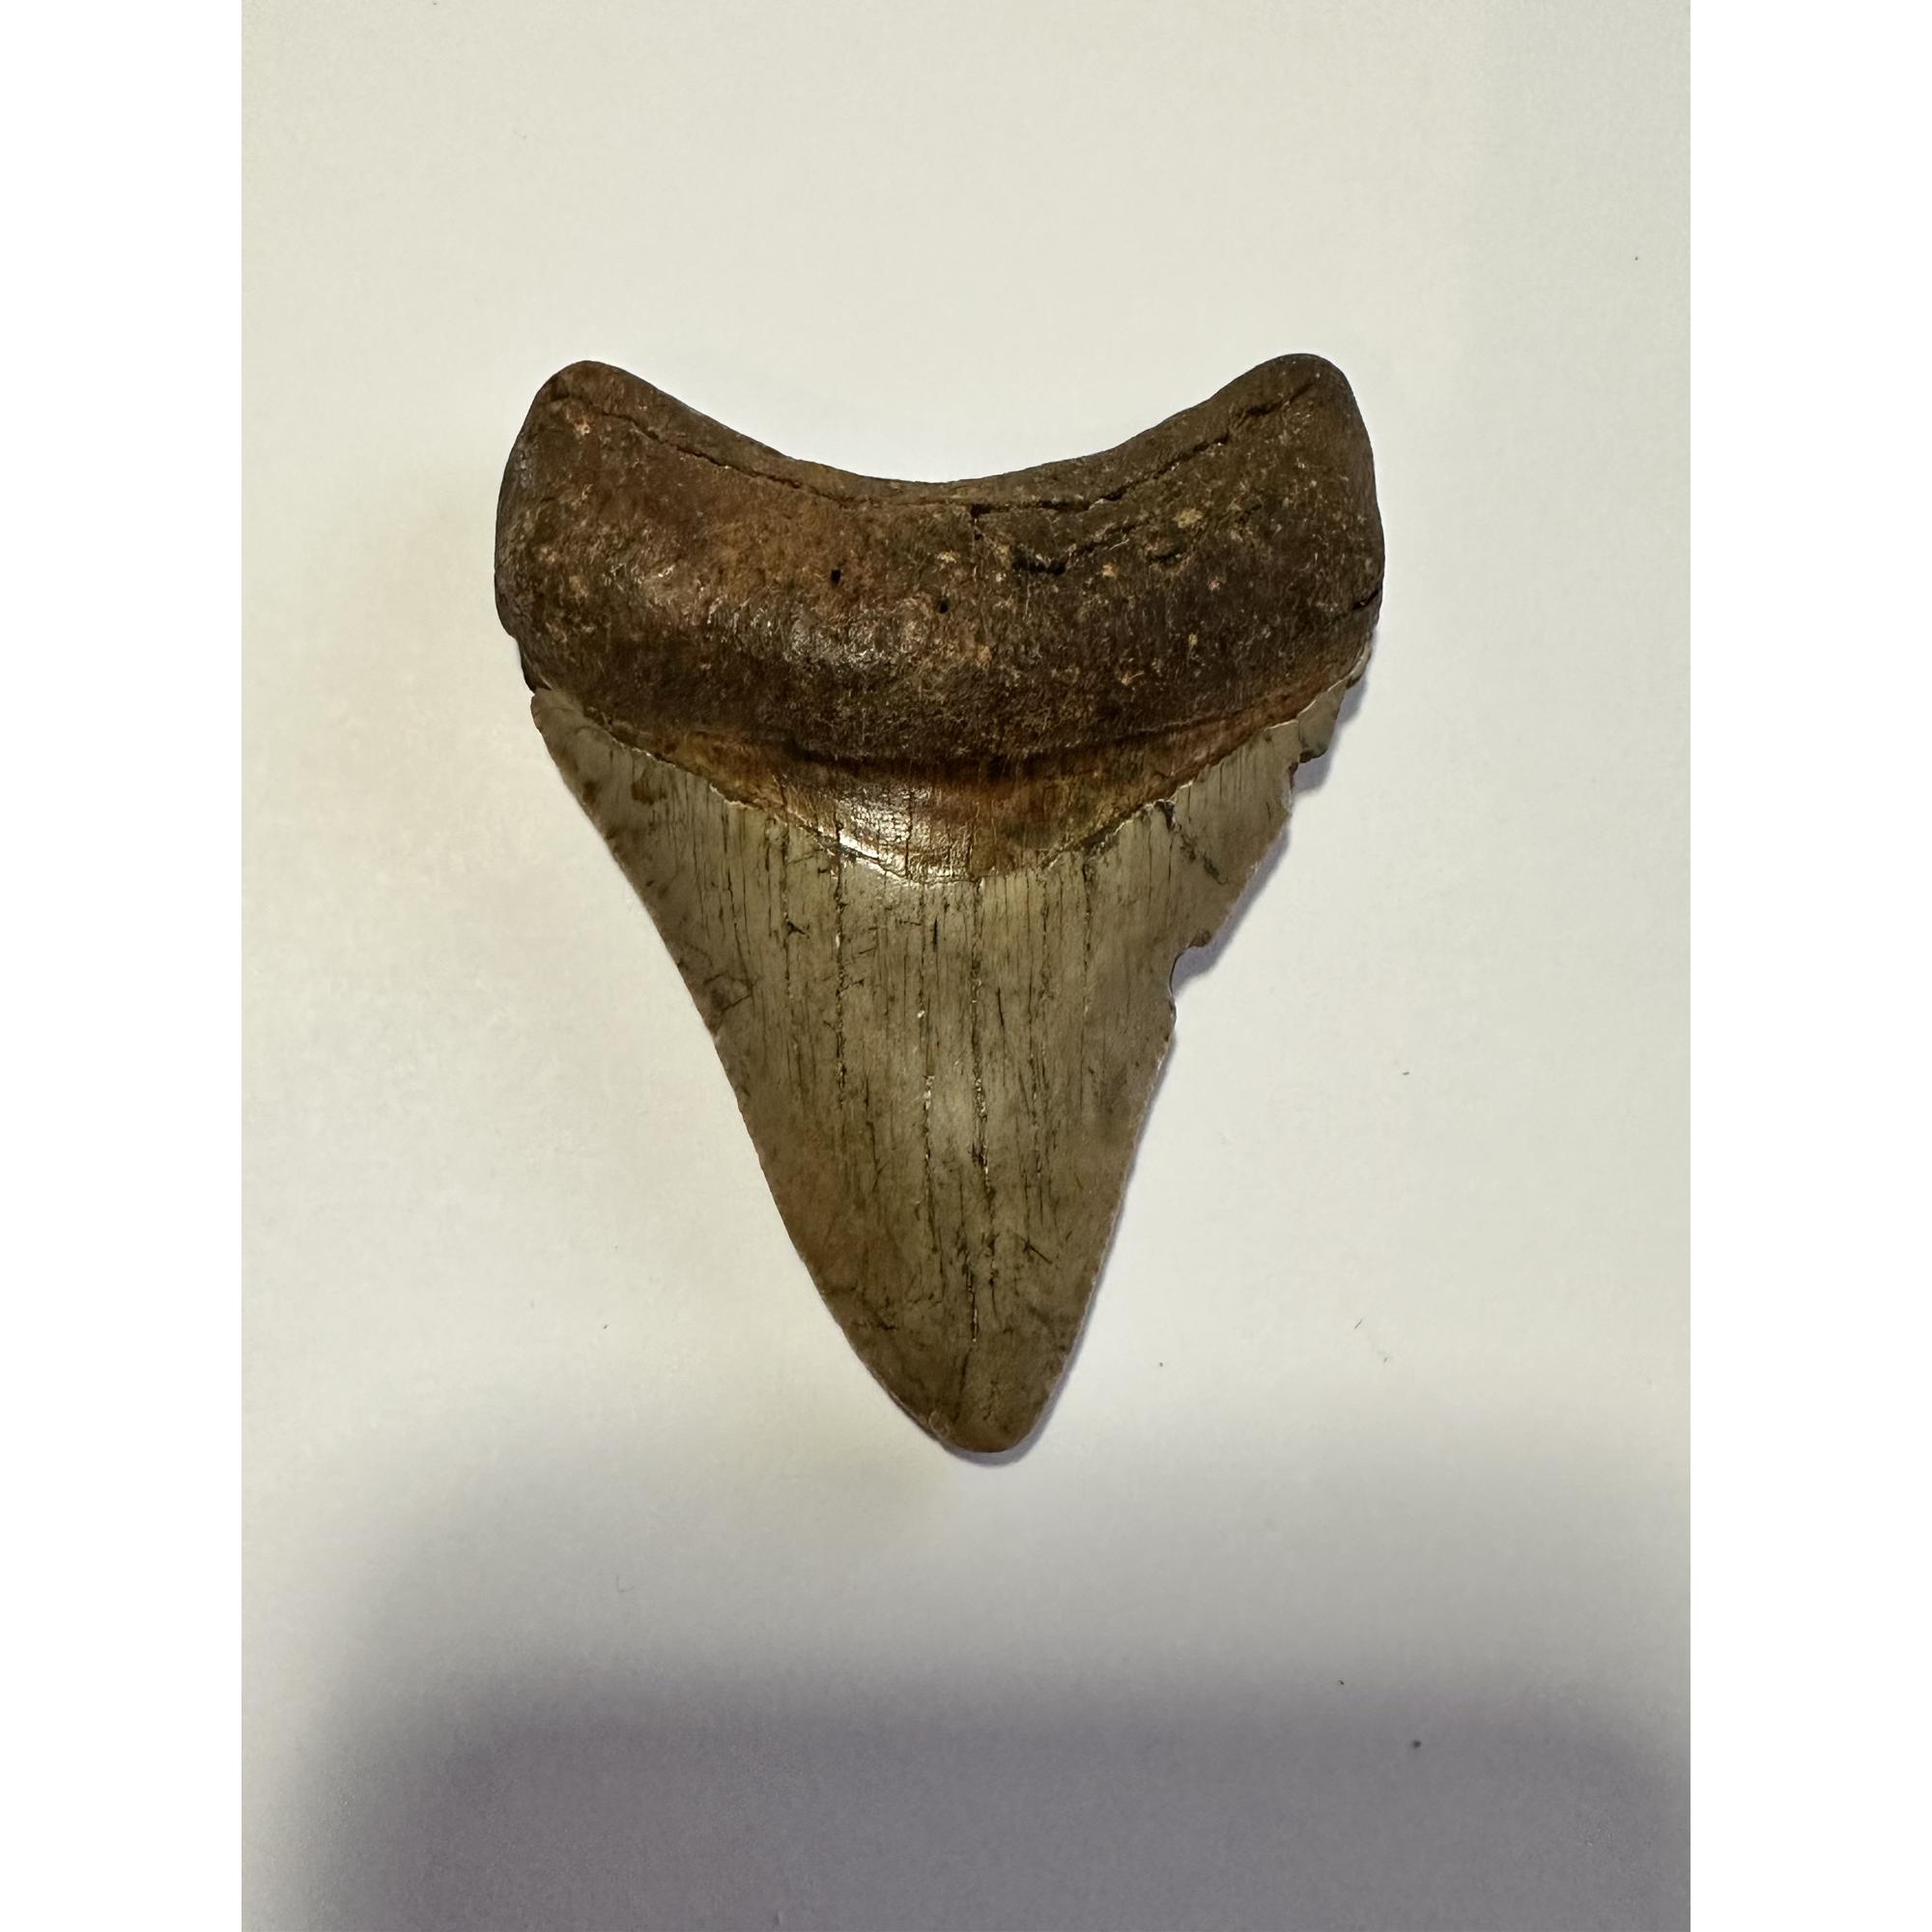 Megalodon serrated golden tooth, 3.20”, South Carolina river